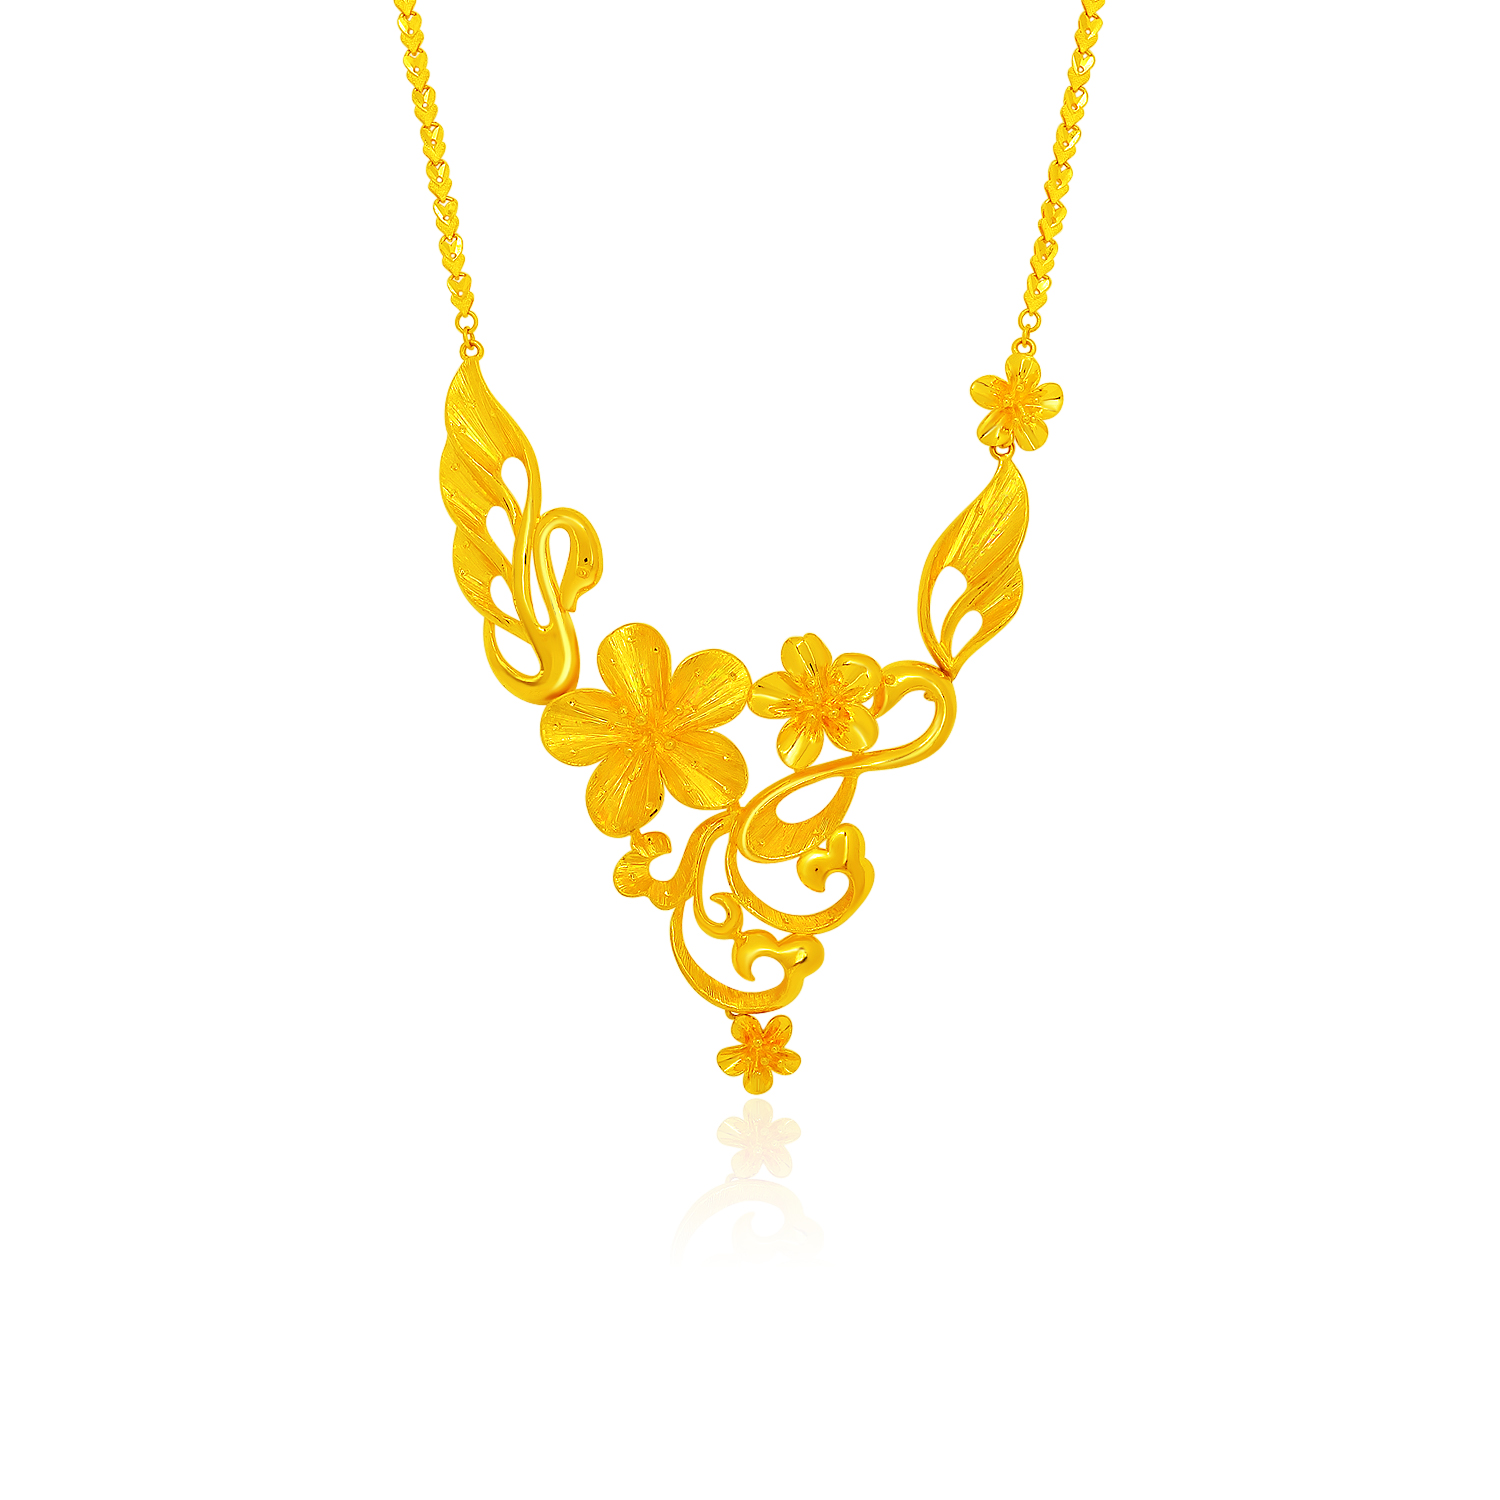 Swan Love 999 Pure Gold Necklace | SK Jewellery